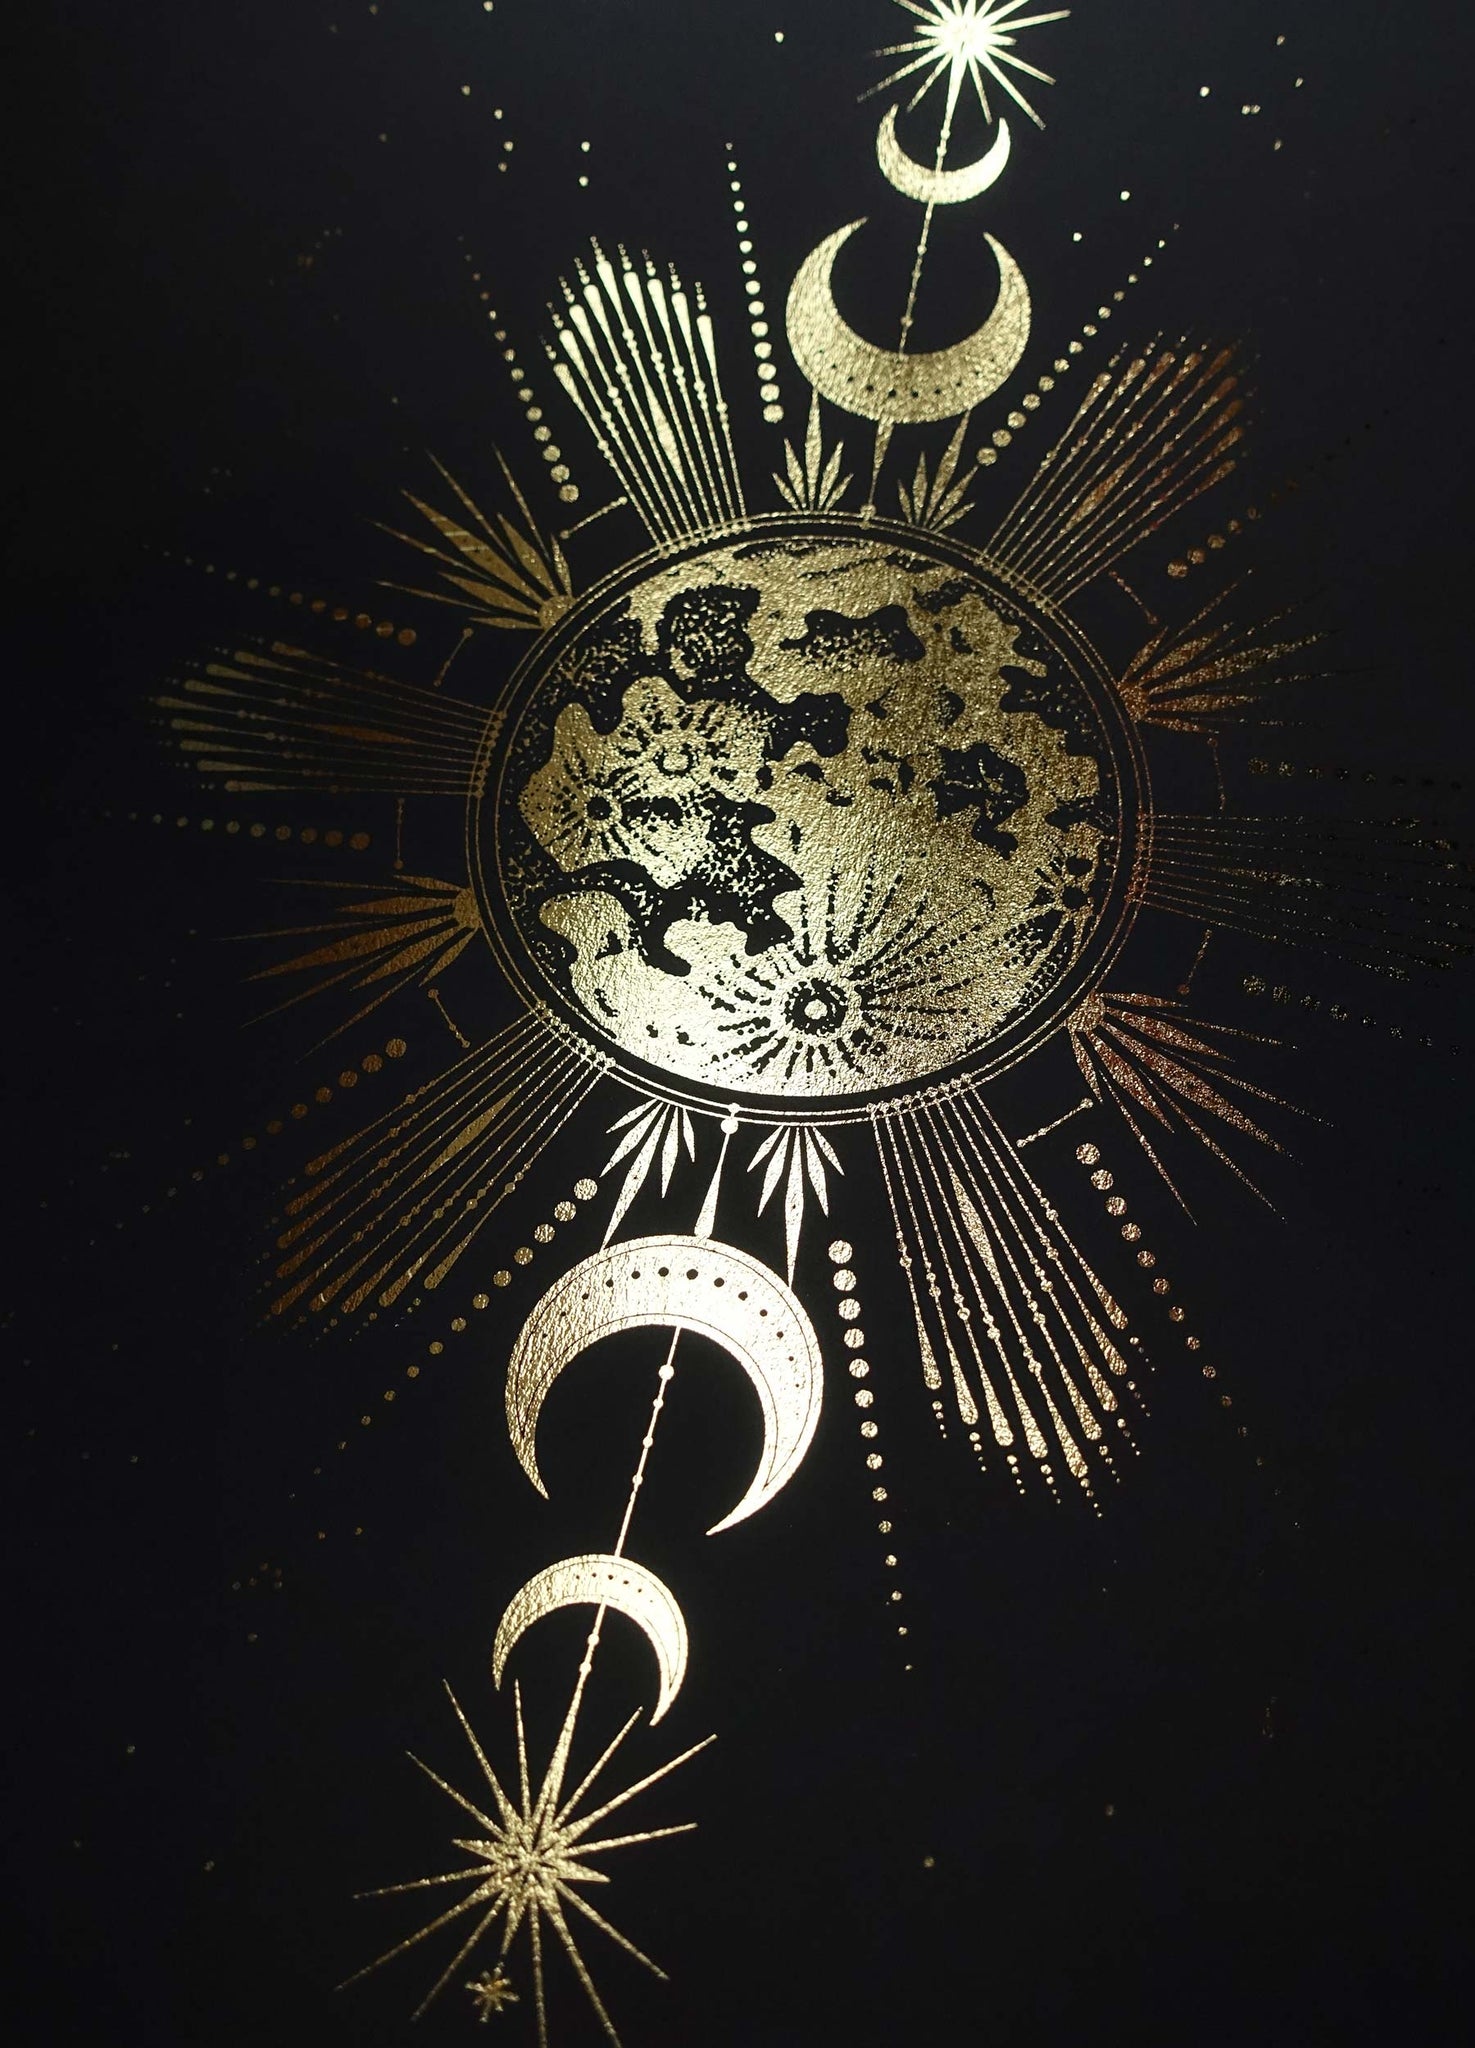 Catching the Moonrise art print in gold foil and black paper with stars and moon by Cocorrina